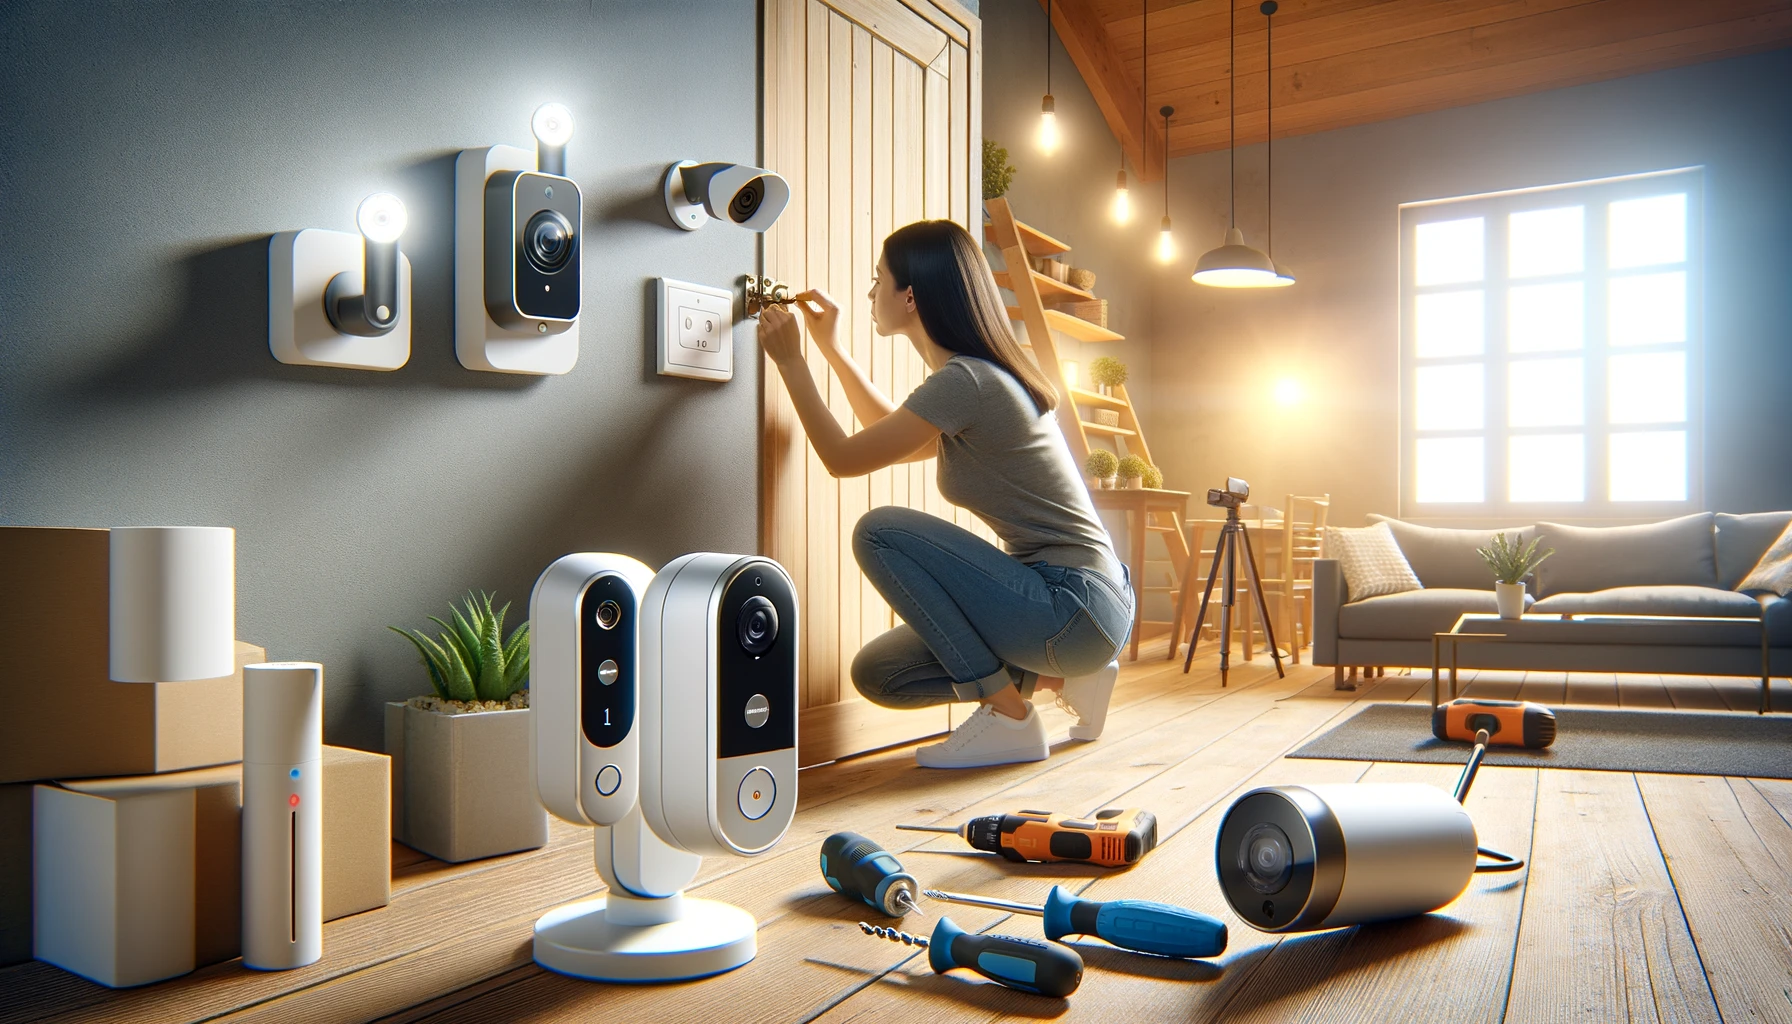 A woman installing home security devices like a smart camera, door and window sensors, and smart locks